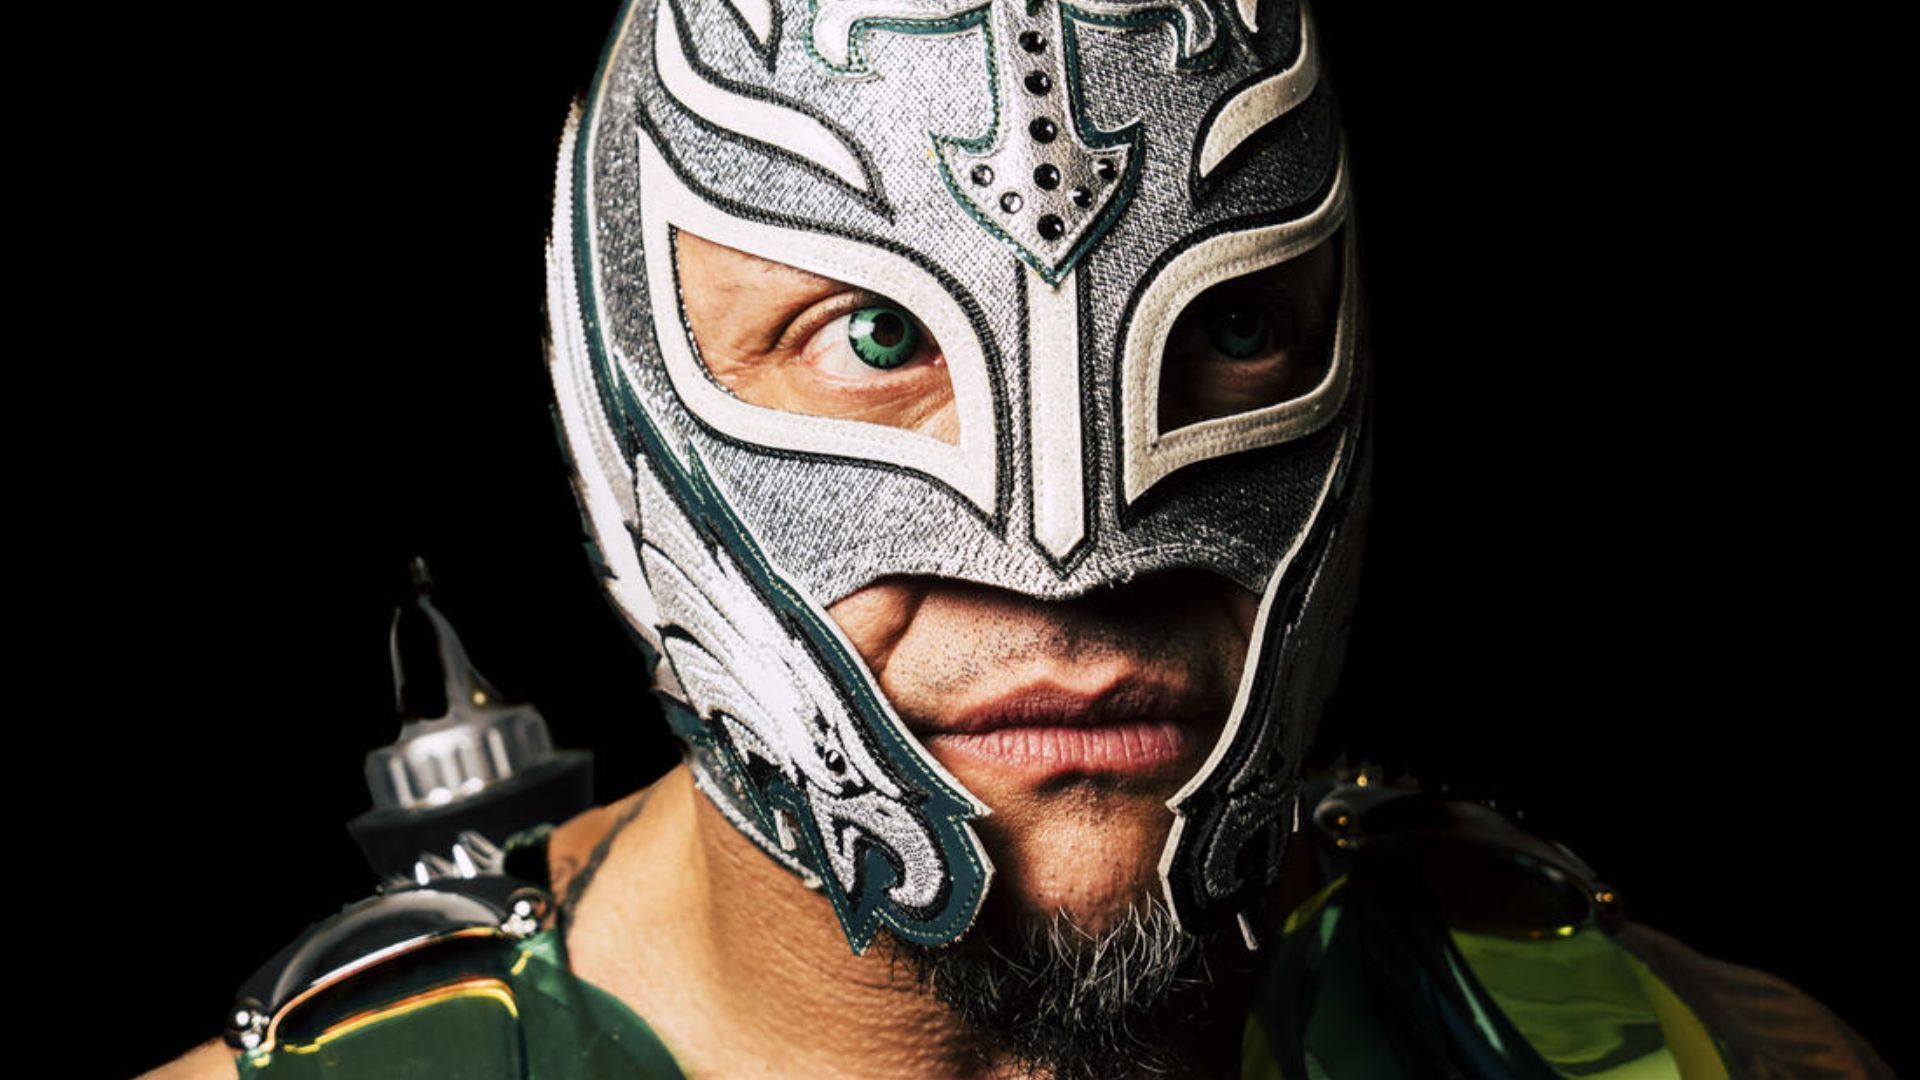 Rey Mysterio is self-admittedly approaching retirement from wrestling (Credit: WWE)